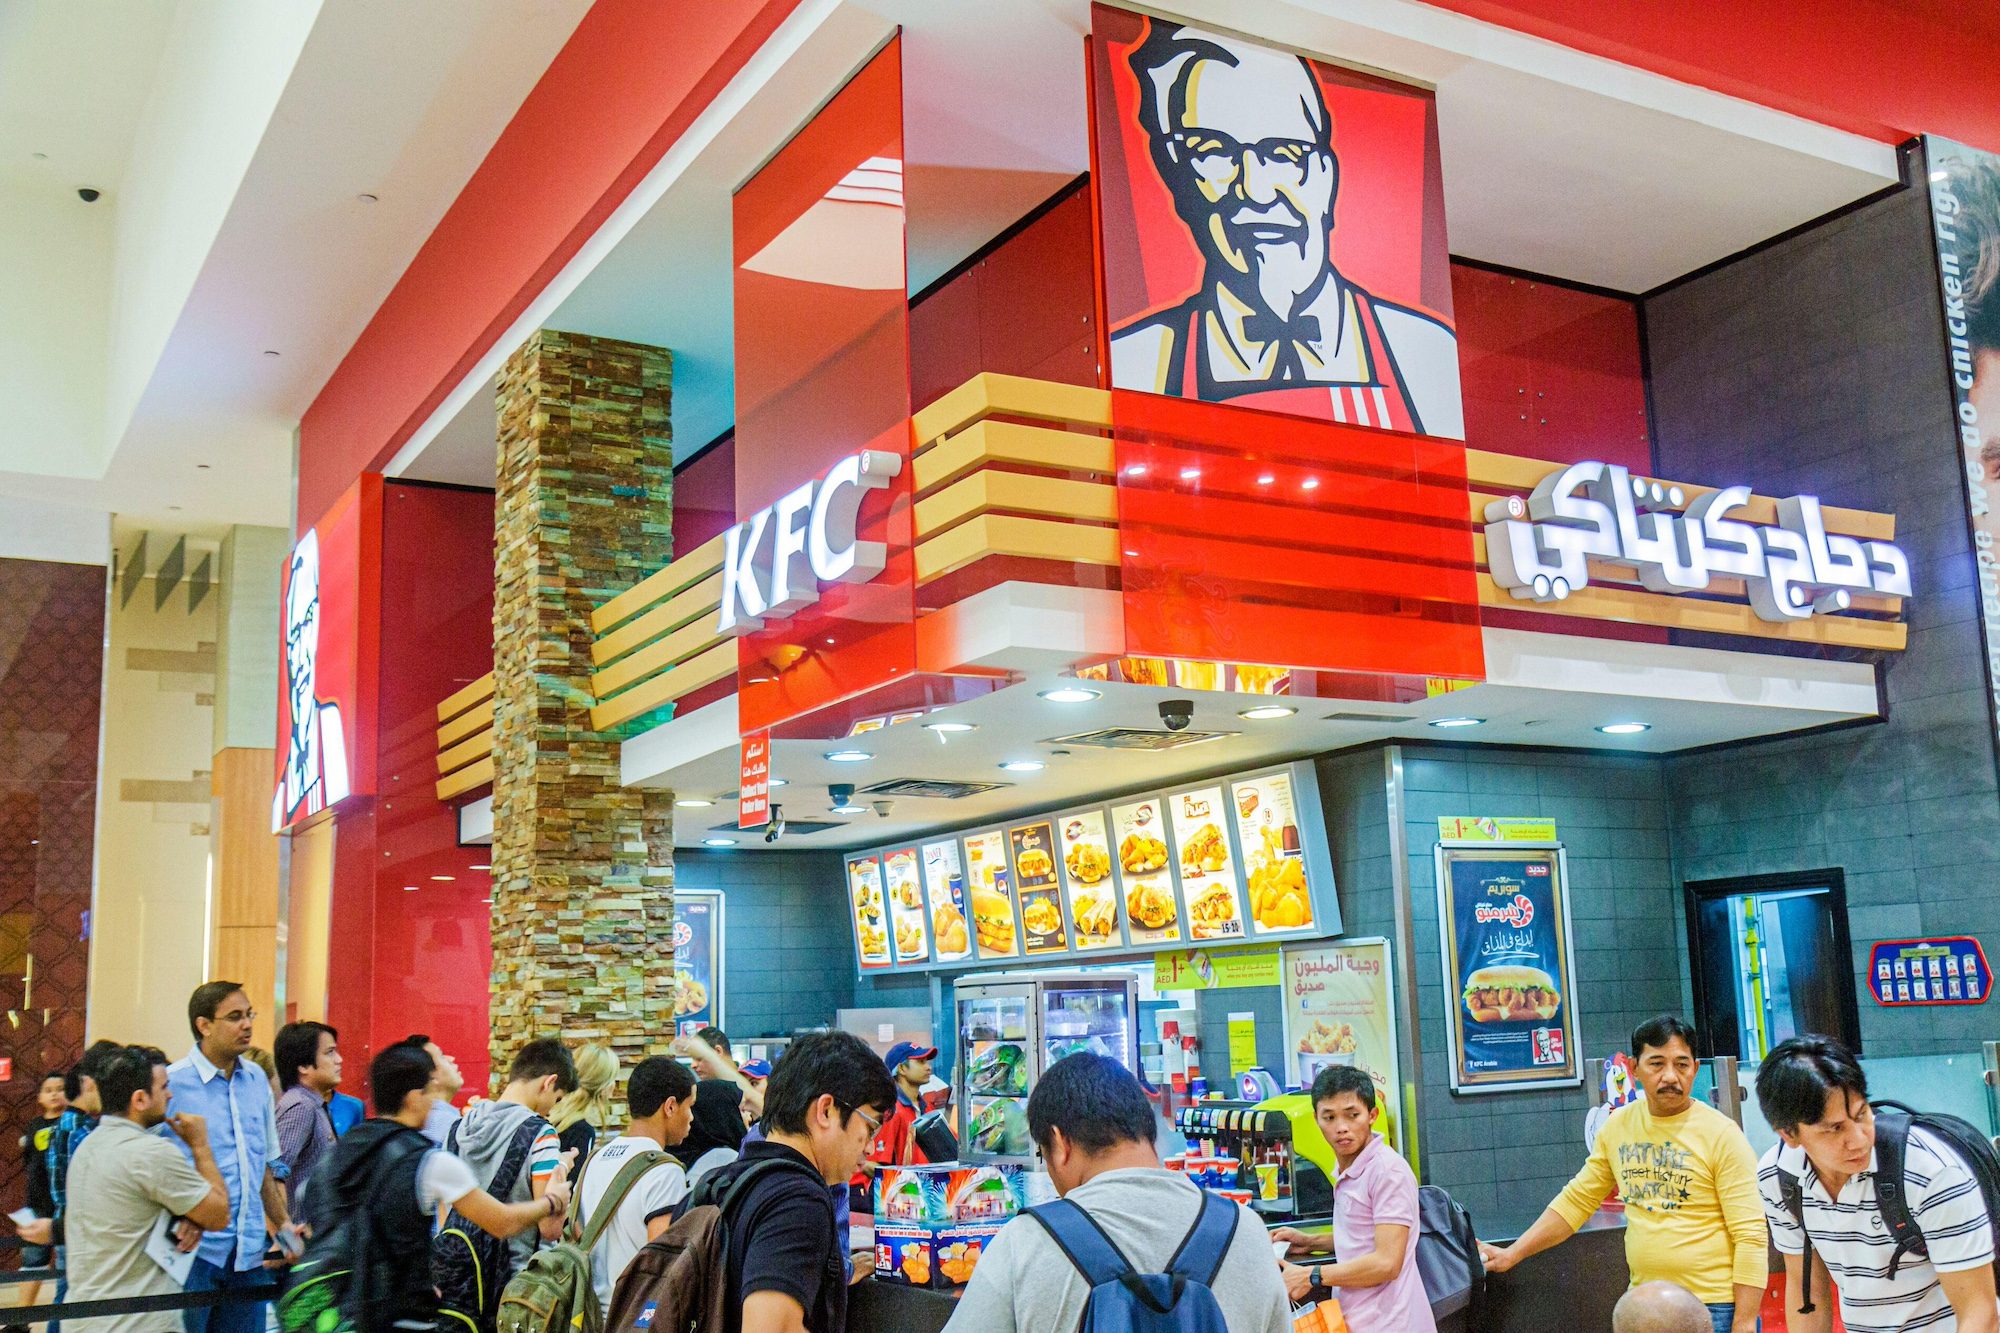 A KFC outlet in a Dubai mall. It accounts for about two-thirds of Americana's sales, but has been hit by boycotts